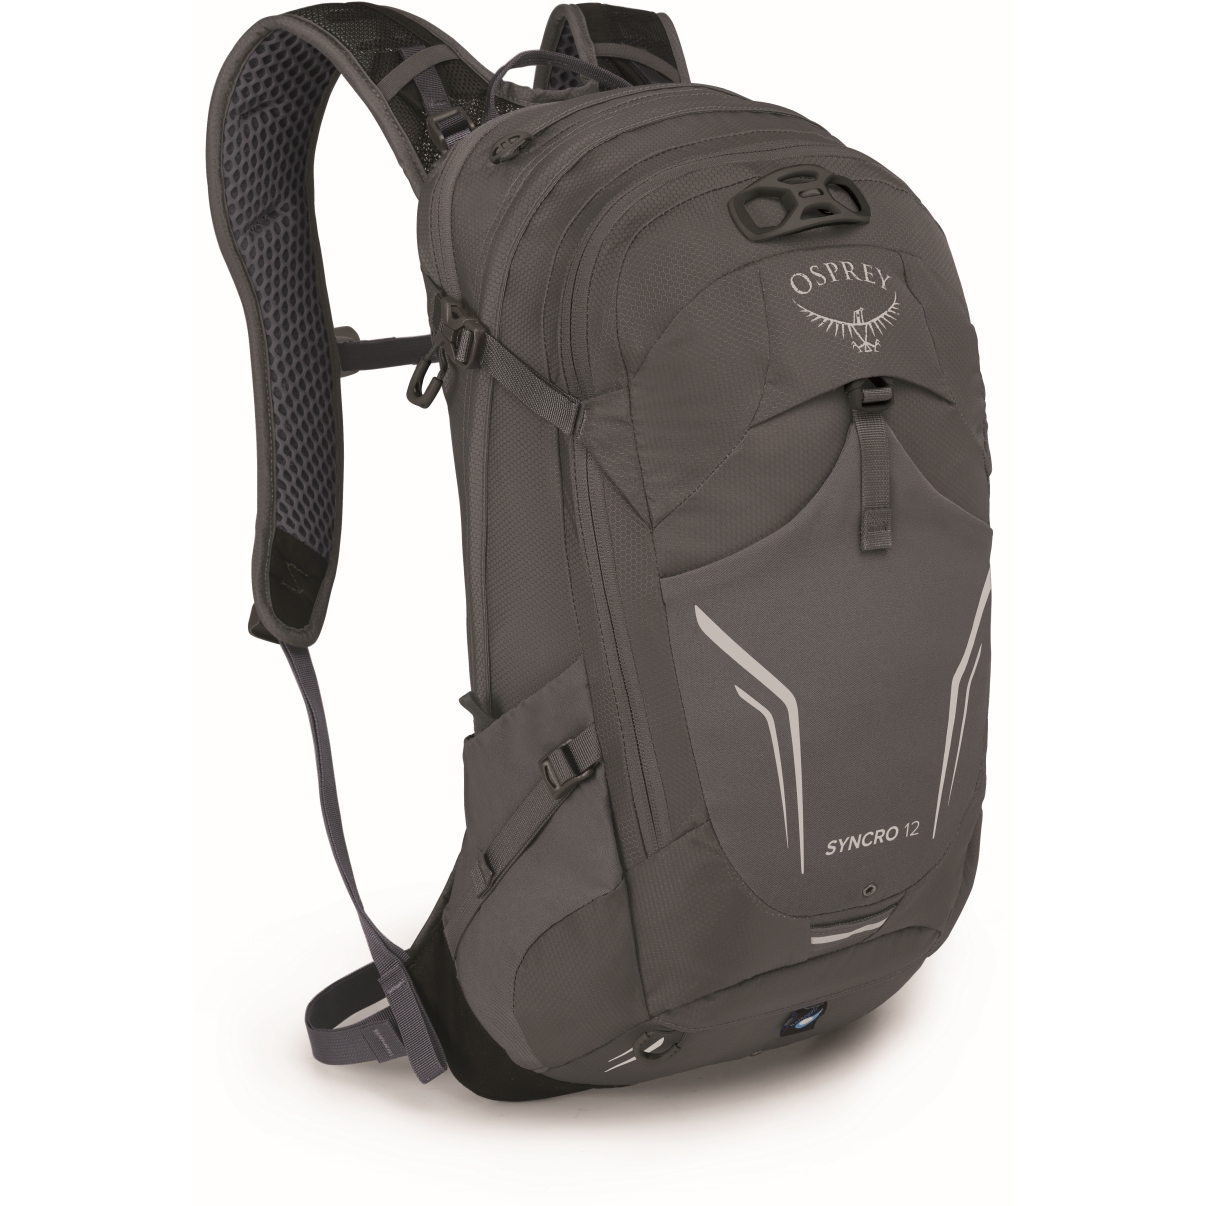 Picture of Osprey Syncro 12 Backpack - Coal Grey